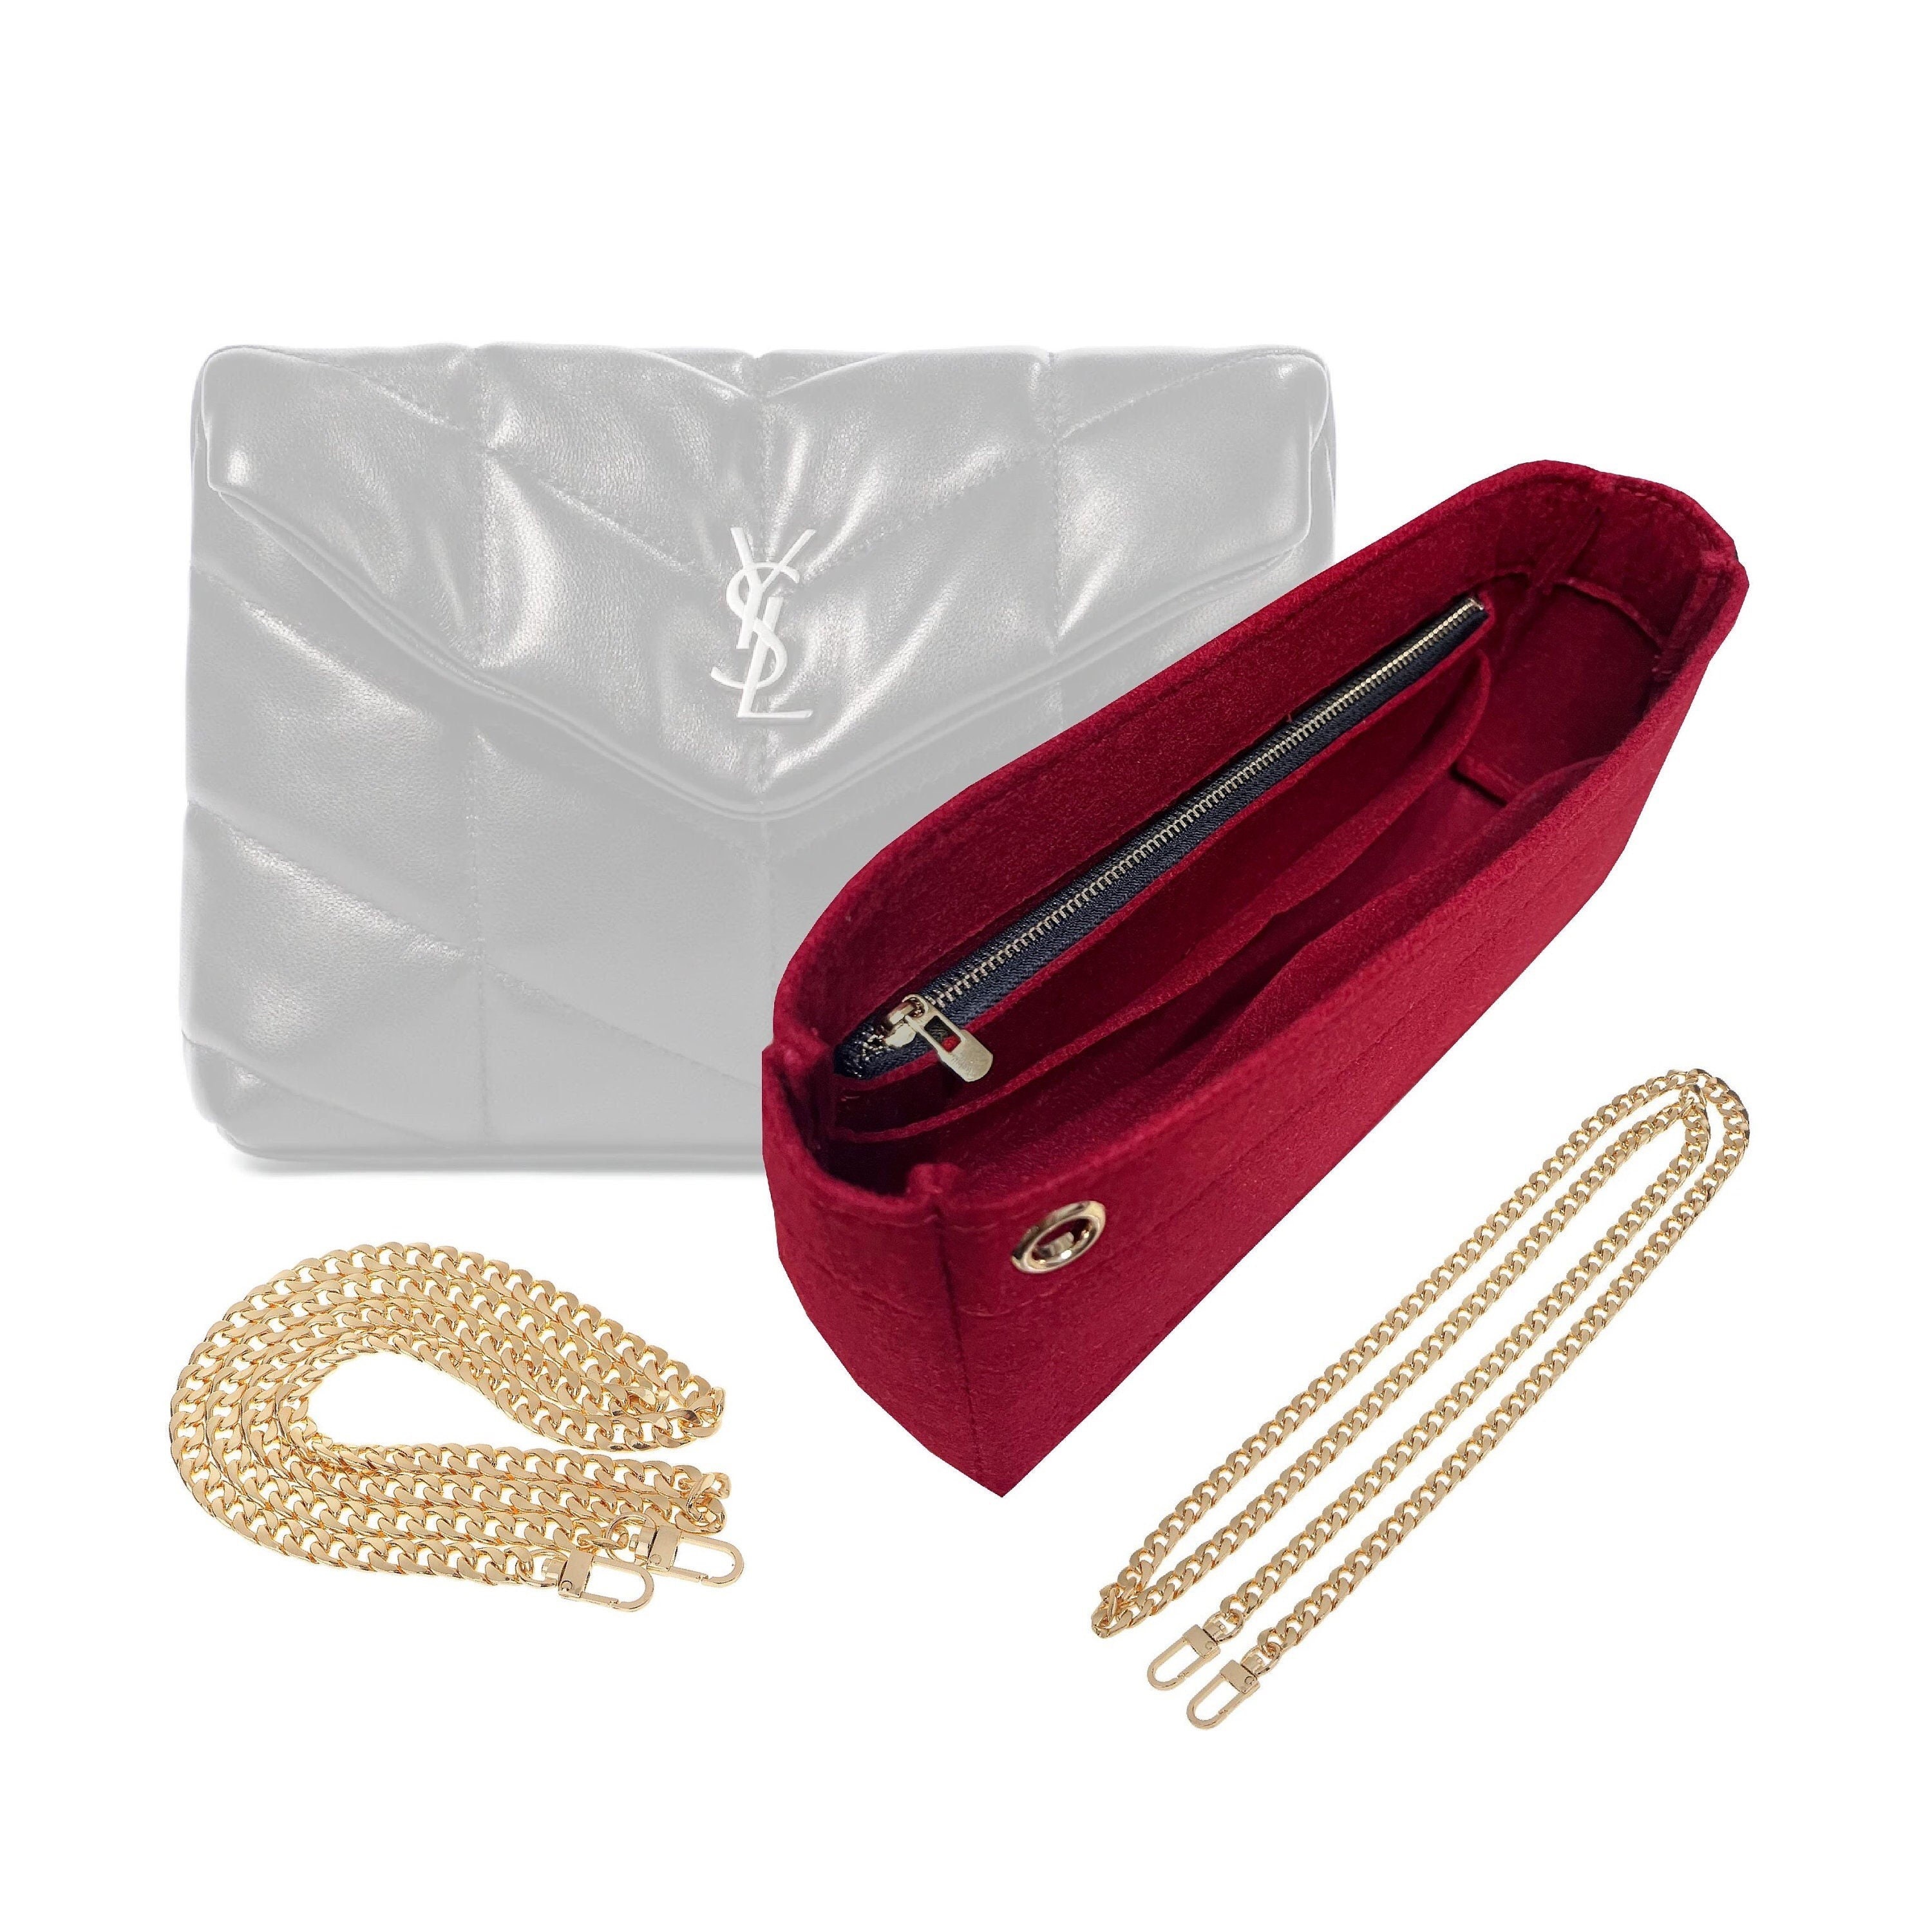 Monogram Clutch Conversion Kit with Gold Chain Wristlet Insert Wallet on Chain (Black)